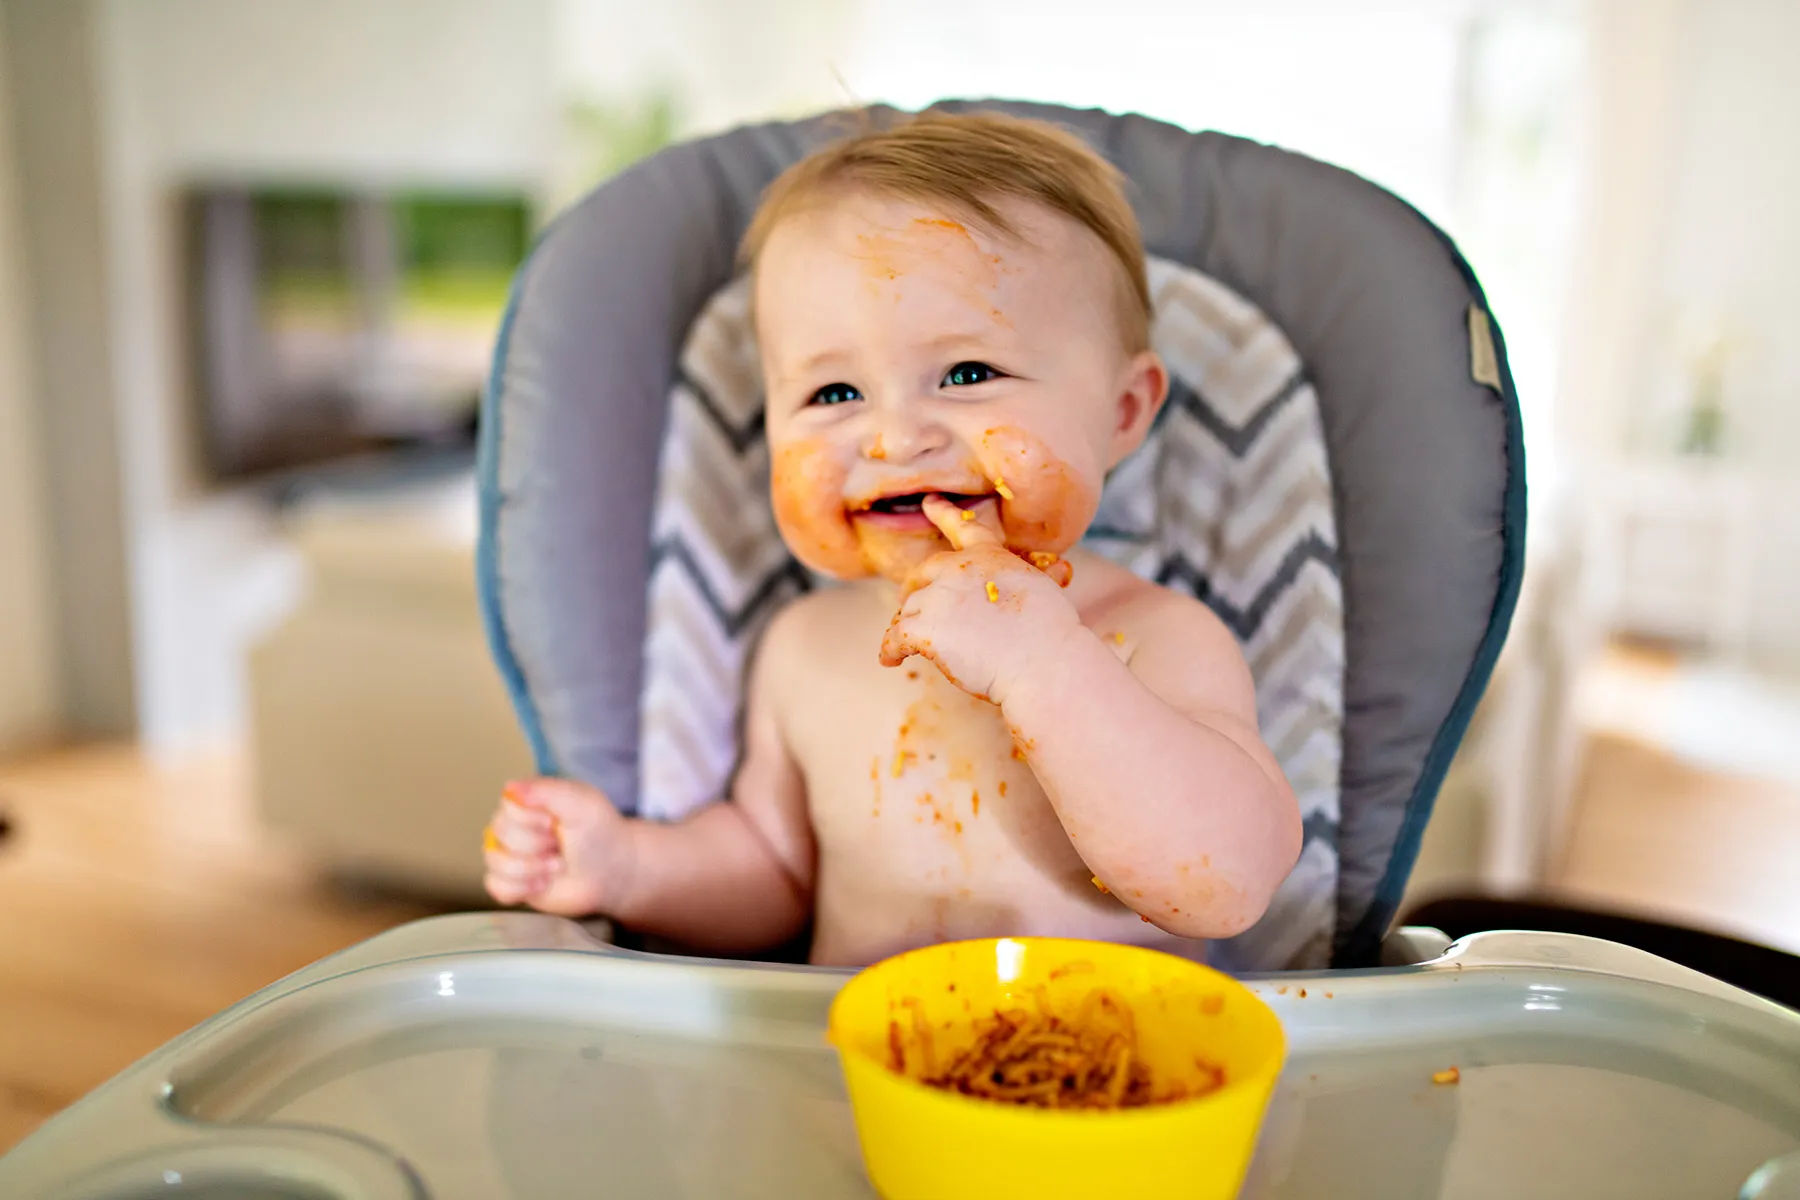 Baby Food Allergies: Identifying and Preventing Them